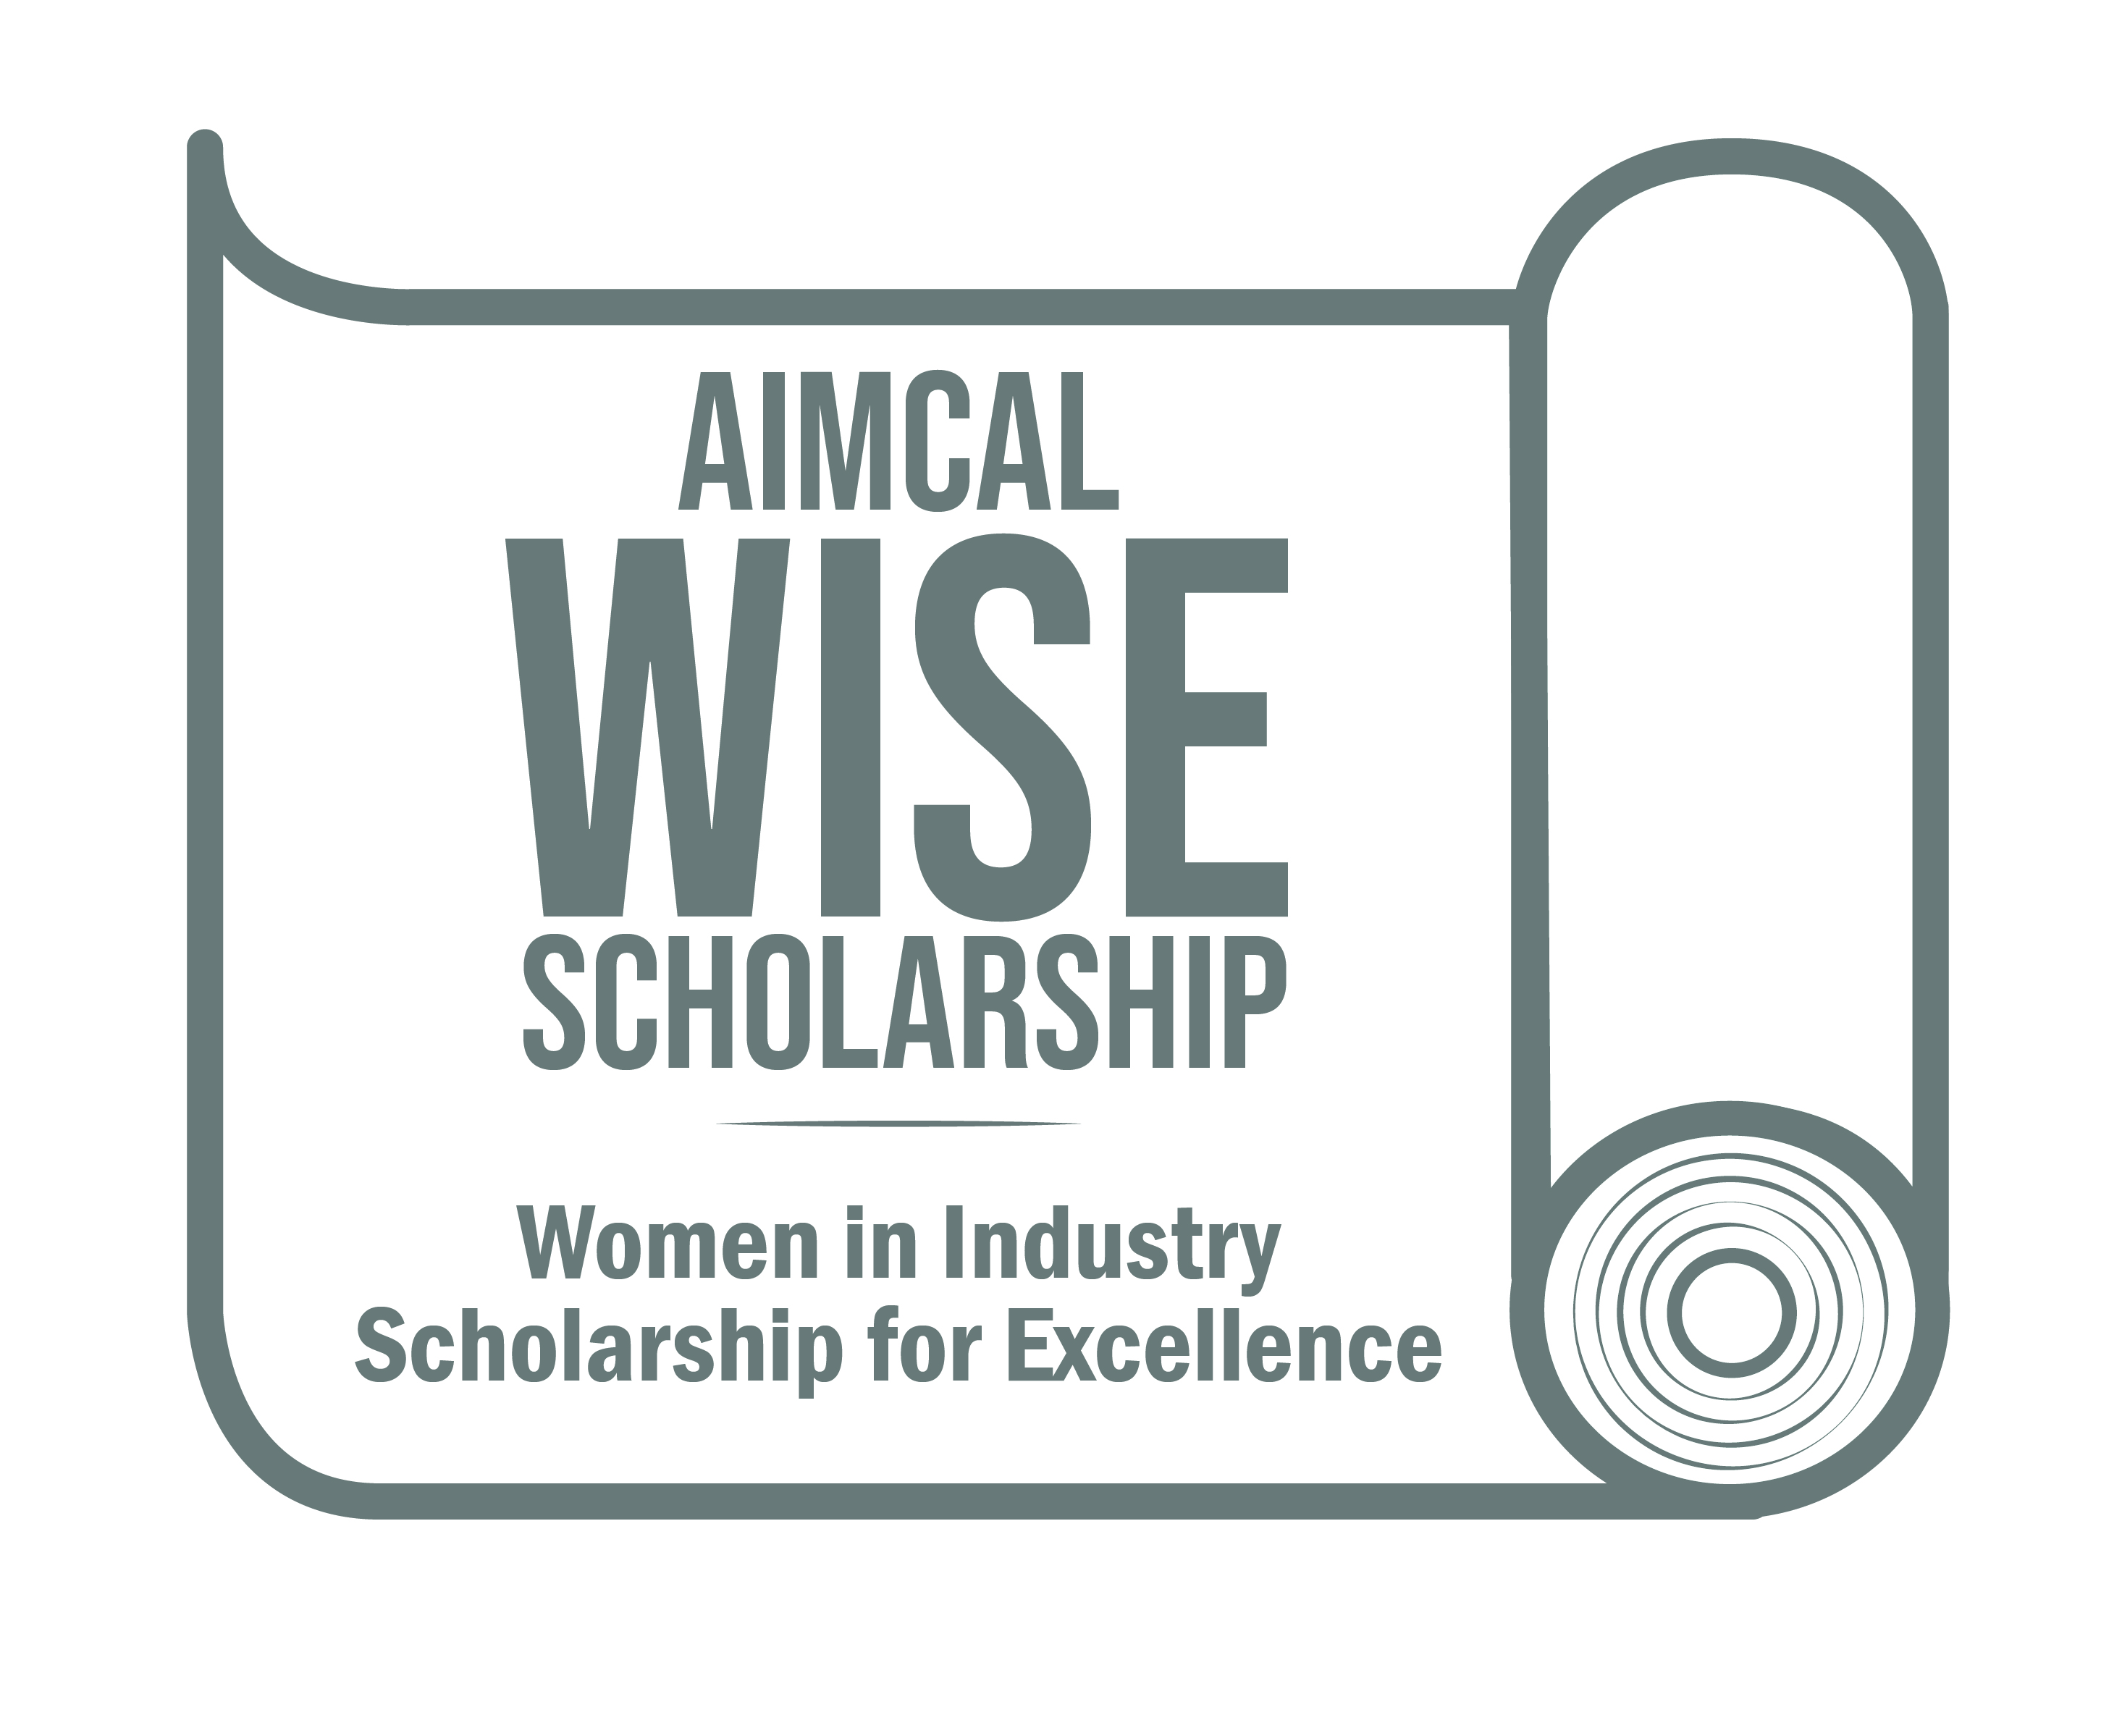 AIMCAL WISE Scholarship Fund - Friends of AIMCAL